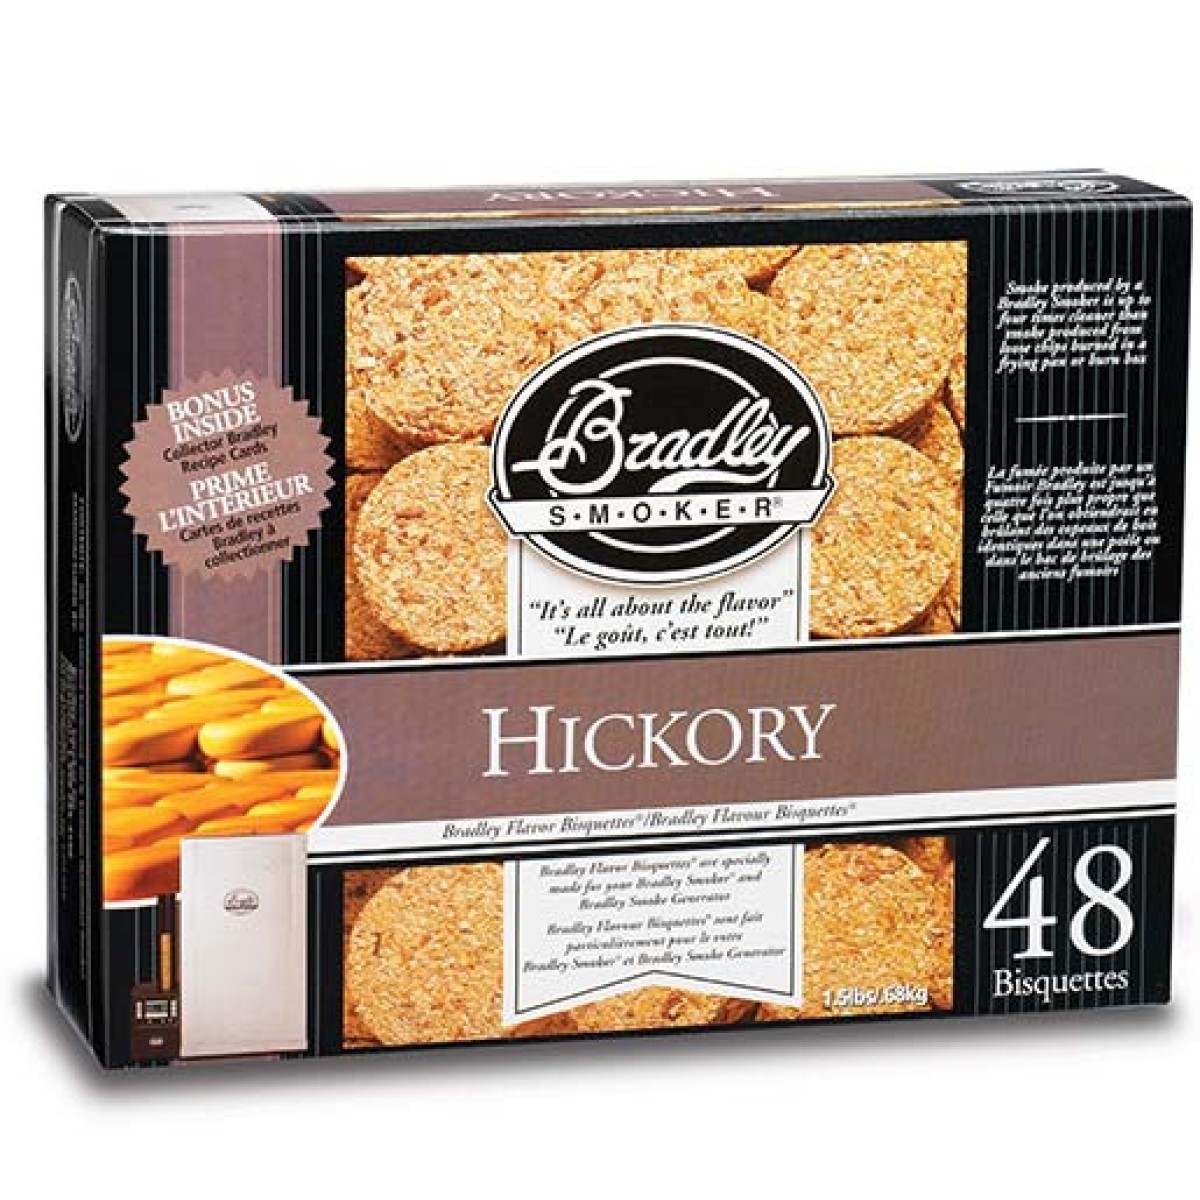 SAWDUST BISQUETTES HICKORY 48 PACK